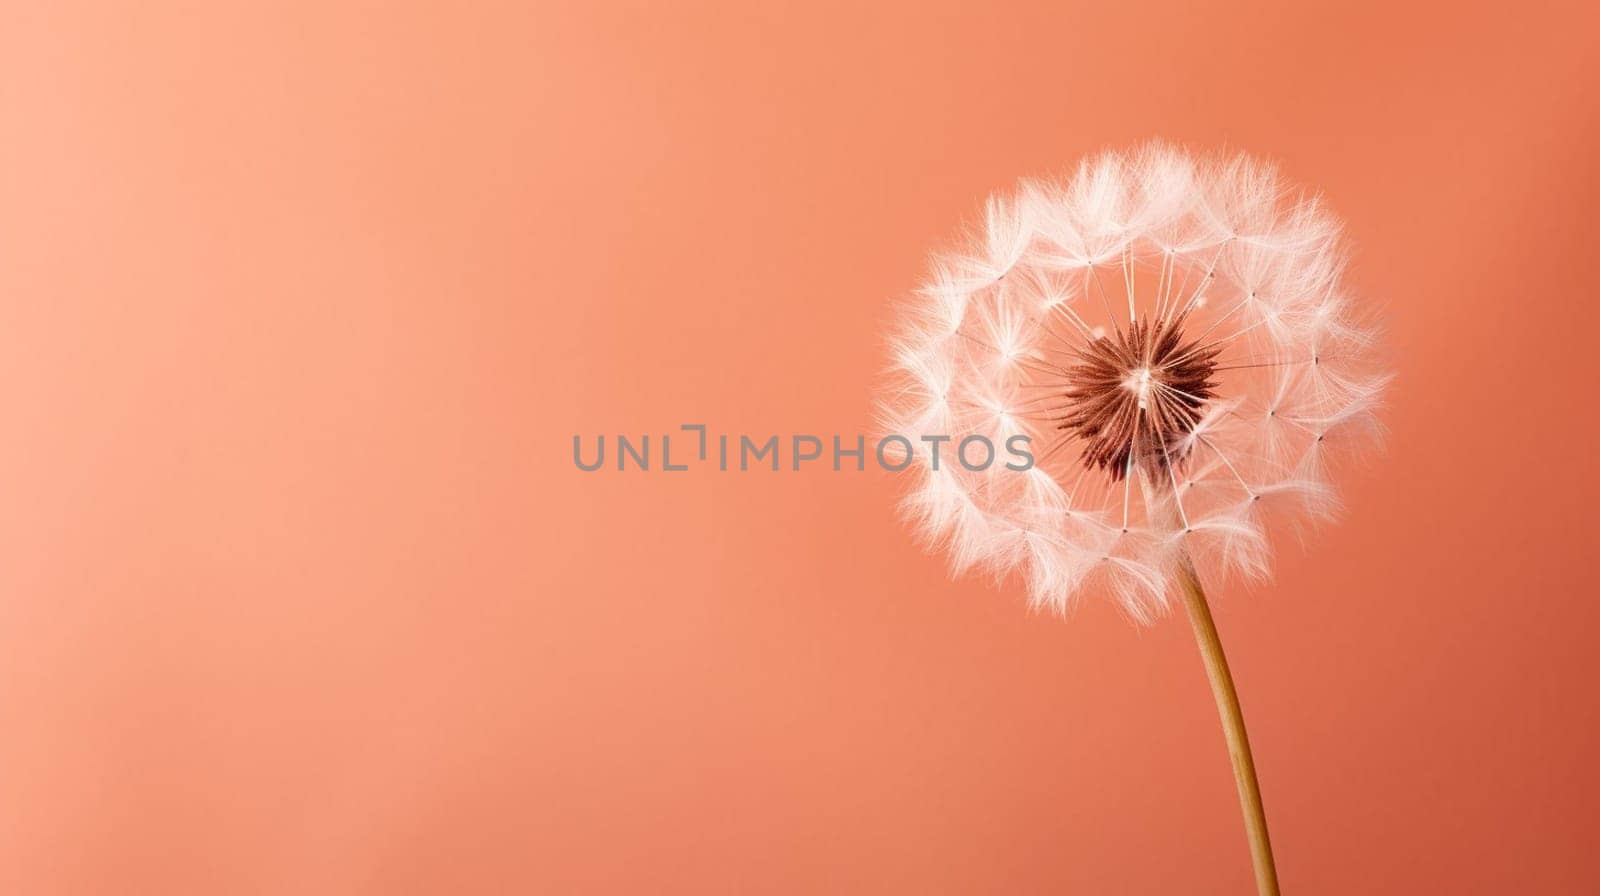 A delicate dandelion seed head stands against a soft peach-colored background, its intricate seeds radiating from the center, symbolic of nature's fragility and beauty. High quality photo